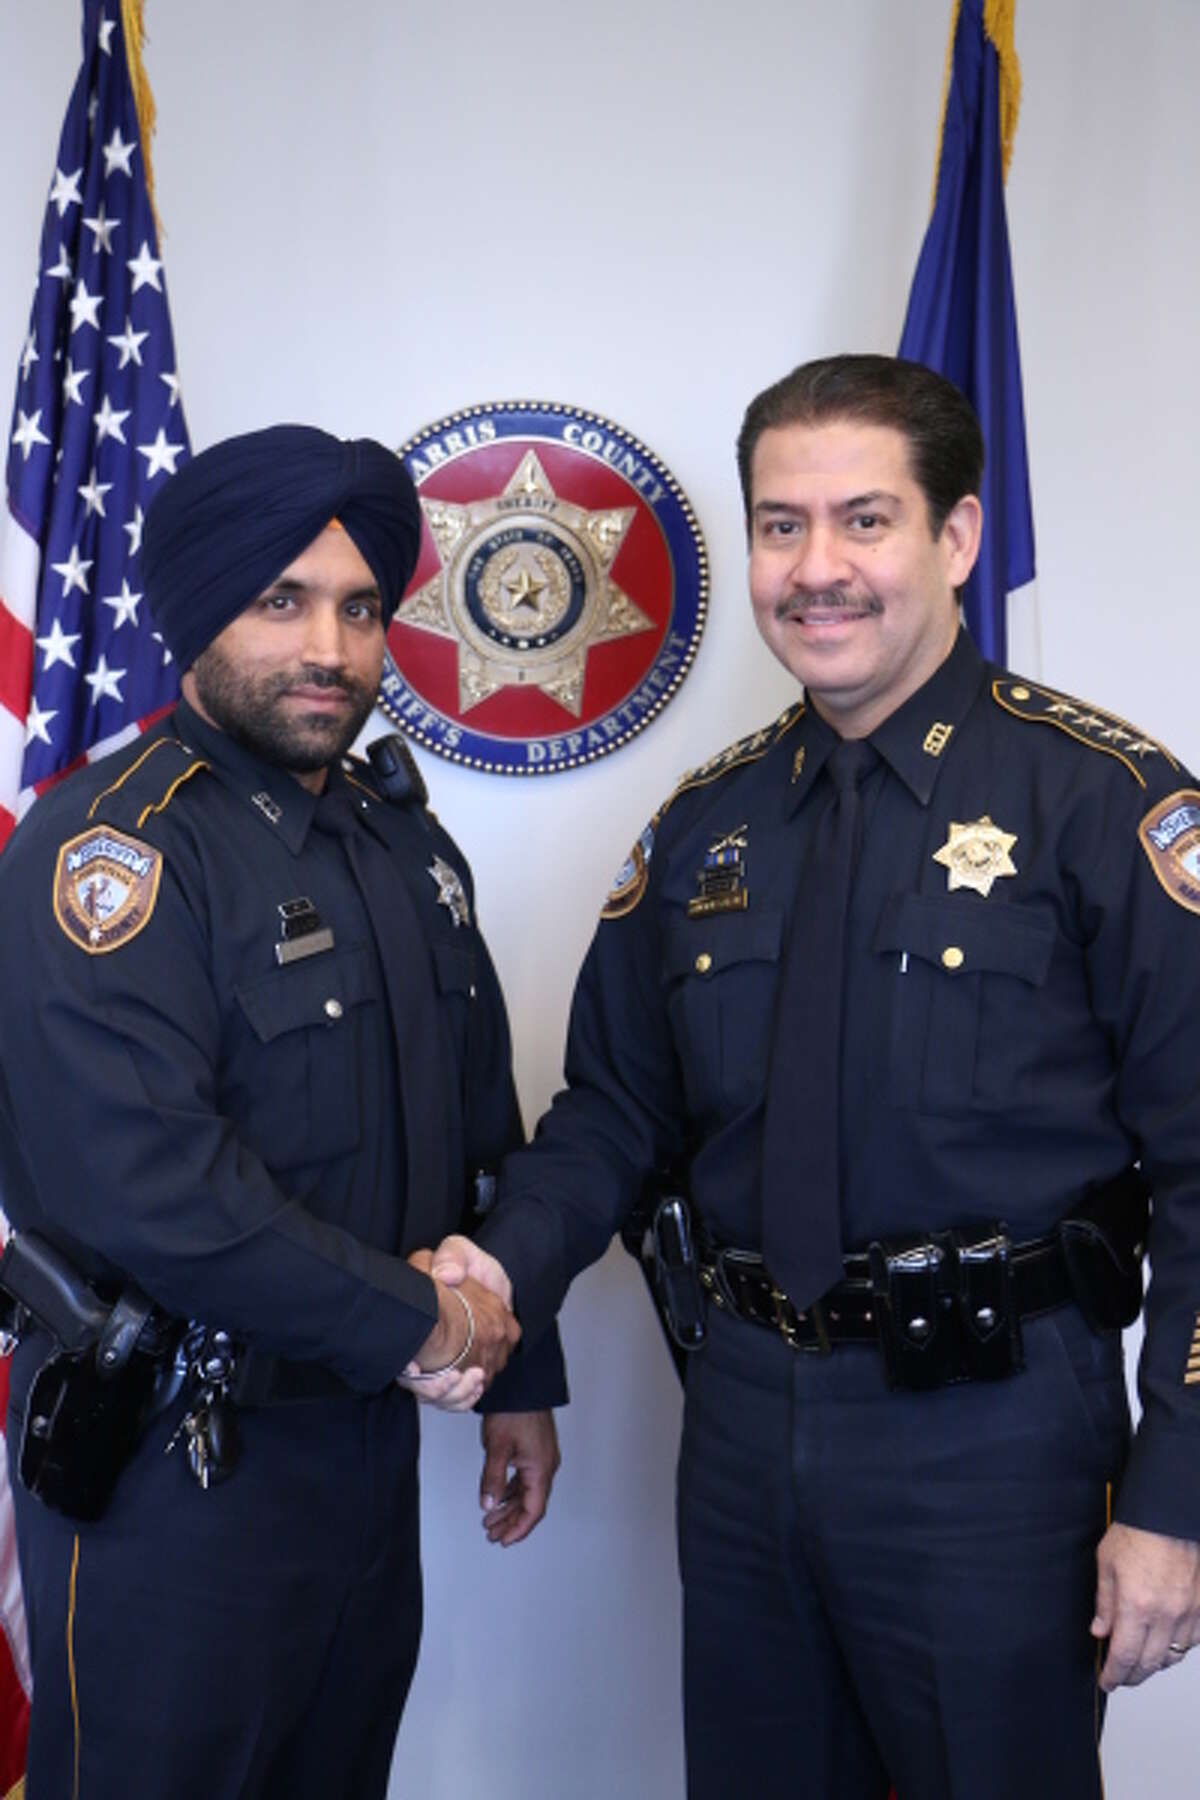 For the first time ever, the Harris County Sheriff’s Office will allow a Sikh deputy to wear his religion’s customary dastaar (turban) and beard while patrolling the streets of Harris County. The agency’s first Sikh deputy, Sandeep Dhaliwal, had not been allowed to do so until now. He’s been with the sheriff’s office for six years. A religious accommodation policy implemented by Sheriff Adrian Garcia has made it possible. “By making these religious accommodations we are joining the U.S. military and other law enforcement agencies across the country with observant Sikh Americans among their ranks. Harris County is no different. We are one of the most culturally rich and diverse communities in America,” Sheriff Garcia said in a statement Wednesday. (Photo: Harris County Sheriff's Office)